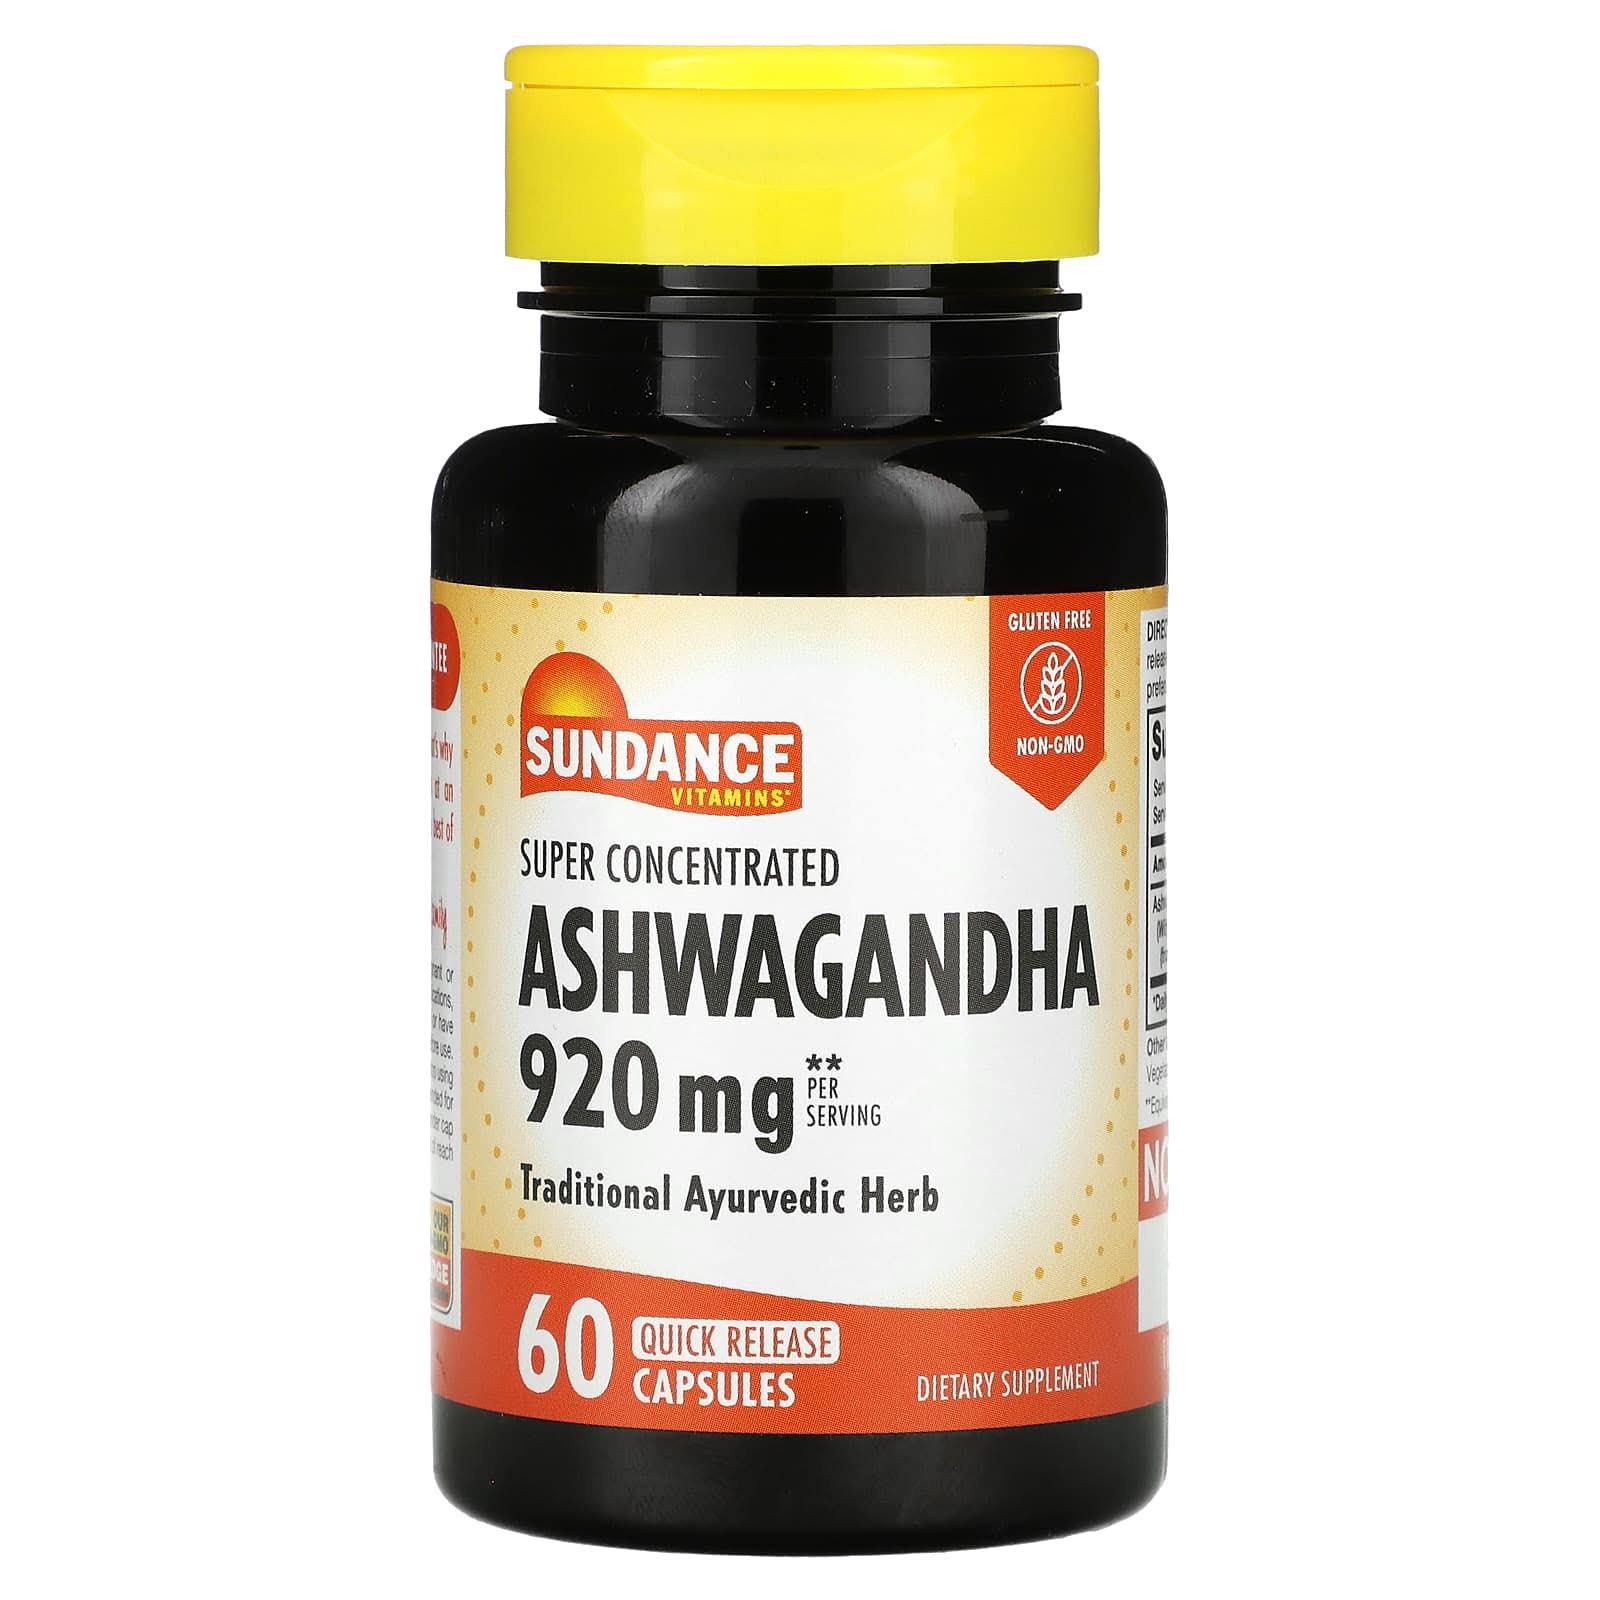 Sundance Vitamins Super Concentrated Ashwagandha 920 mg Quick Release Capsules - 60 ct